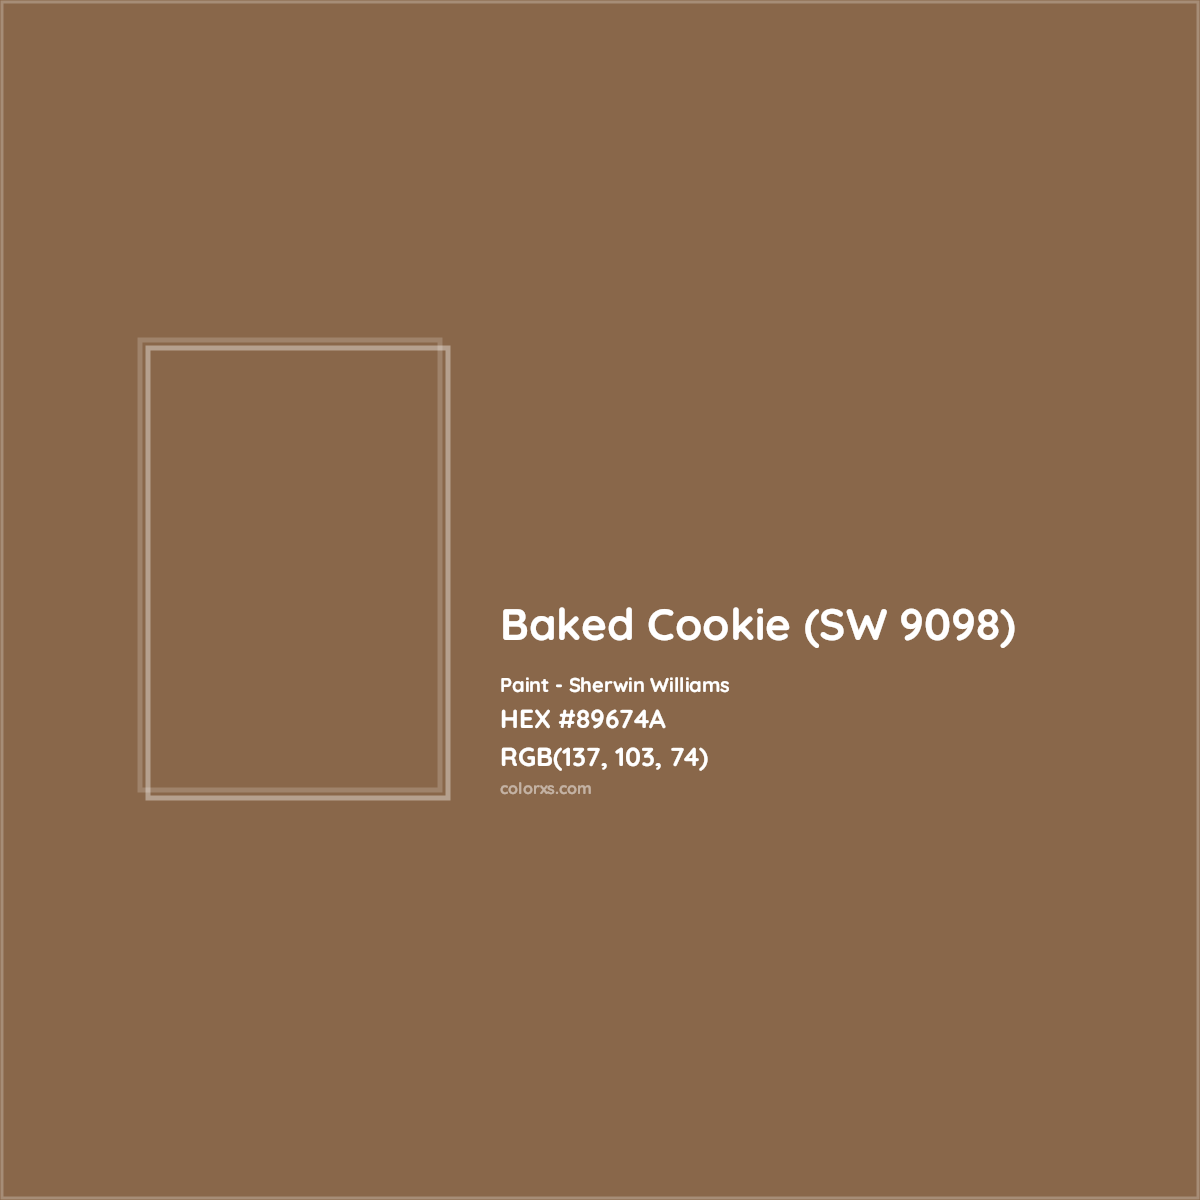 HEX #89674A Baked Cookie (SW 9098) Paint Sherwin Williams - Color Code